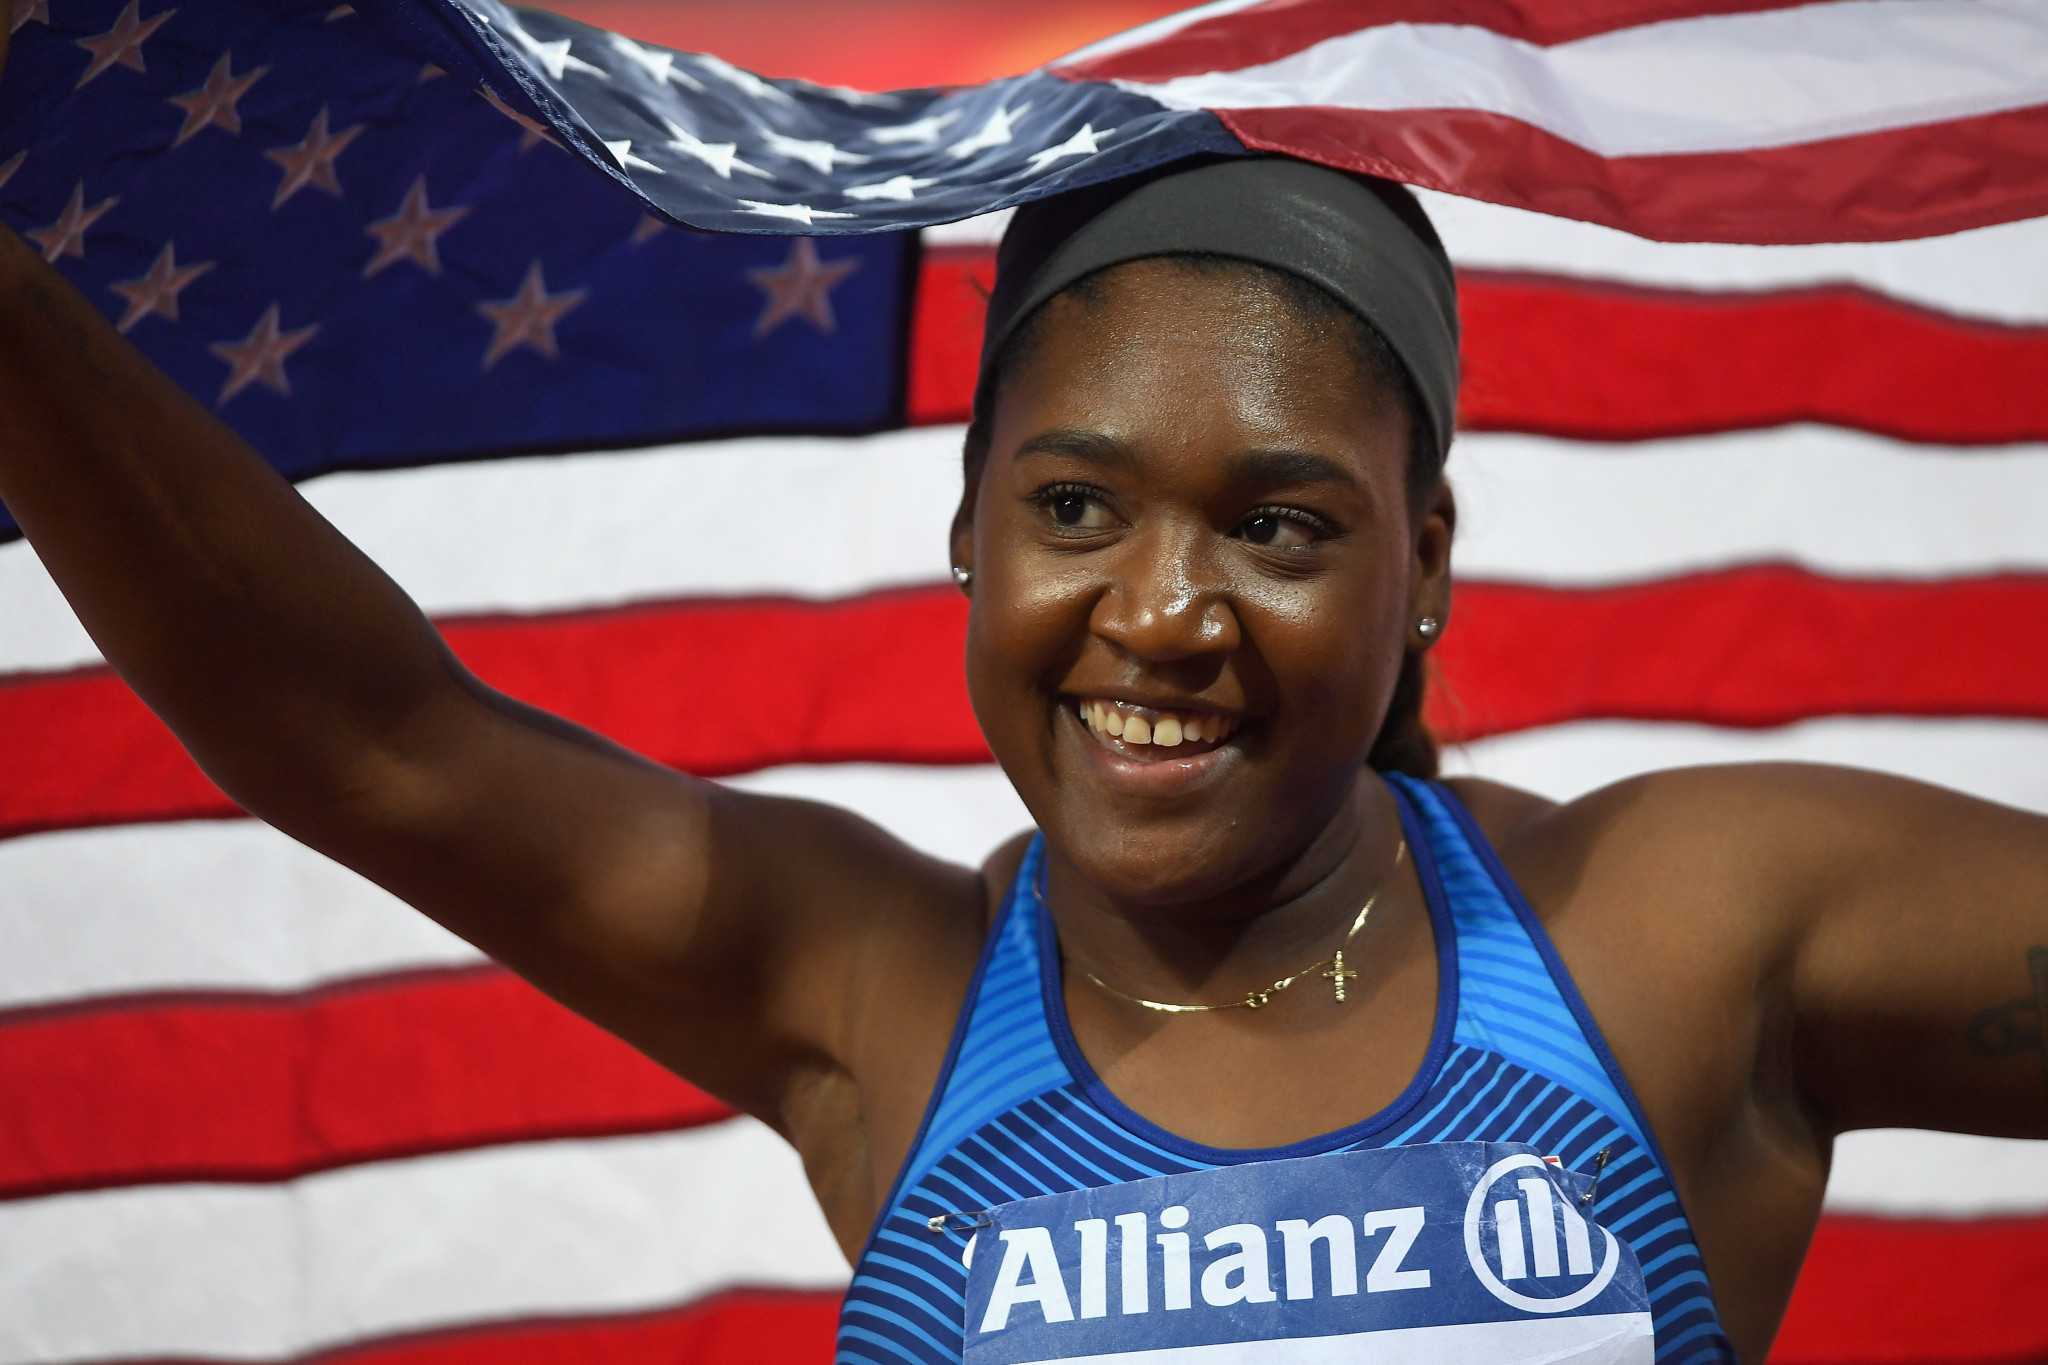 Sixty athletes to represent US track and field team at 2019 Parapan American Games